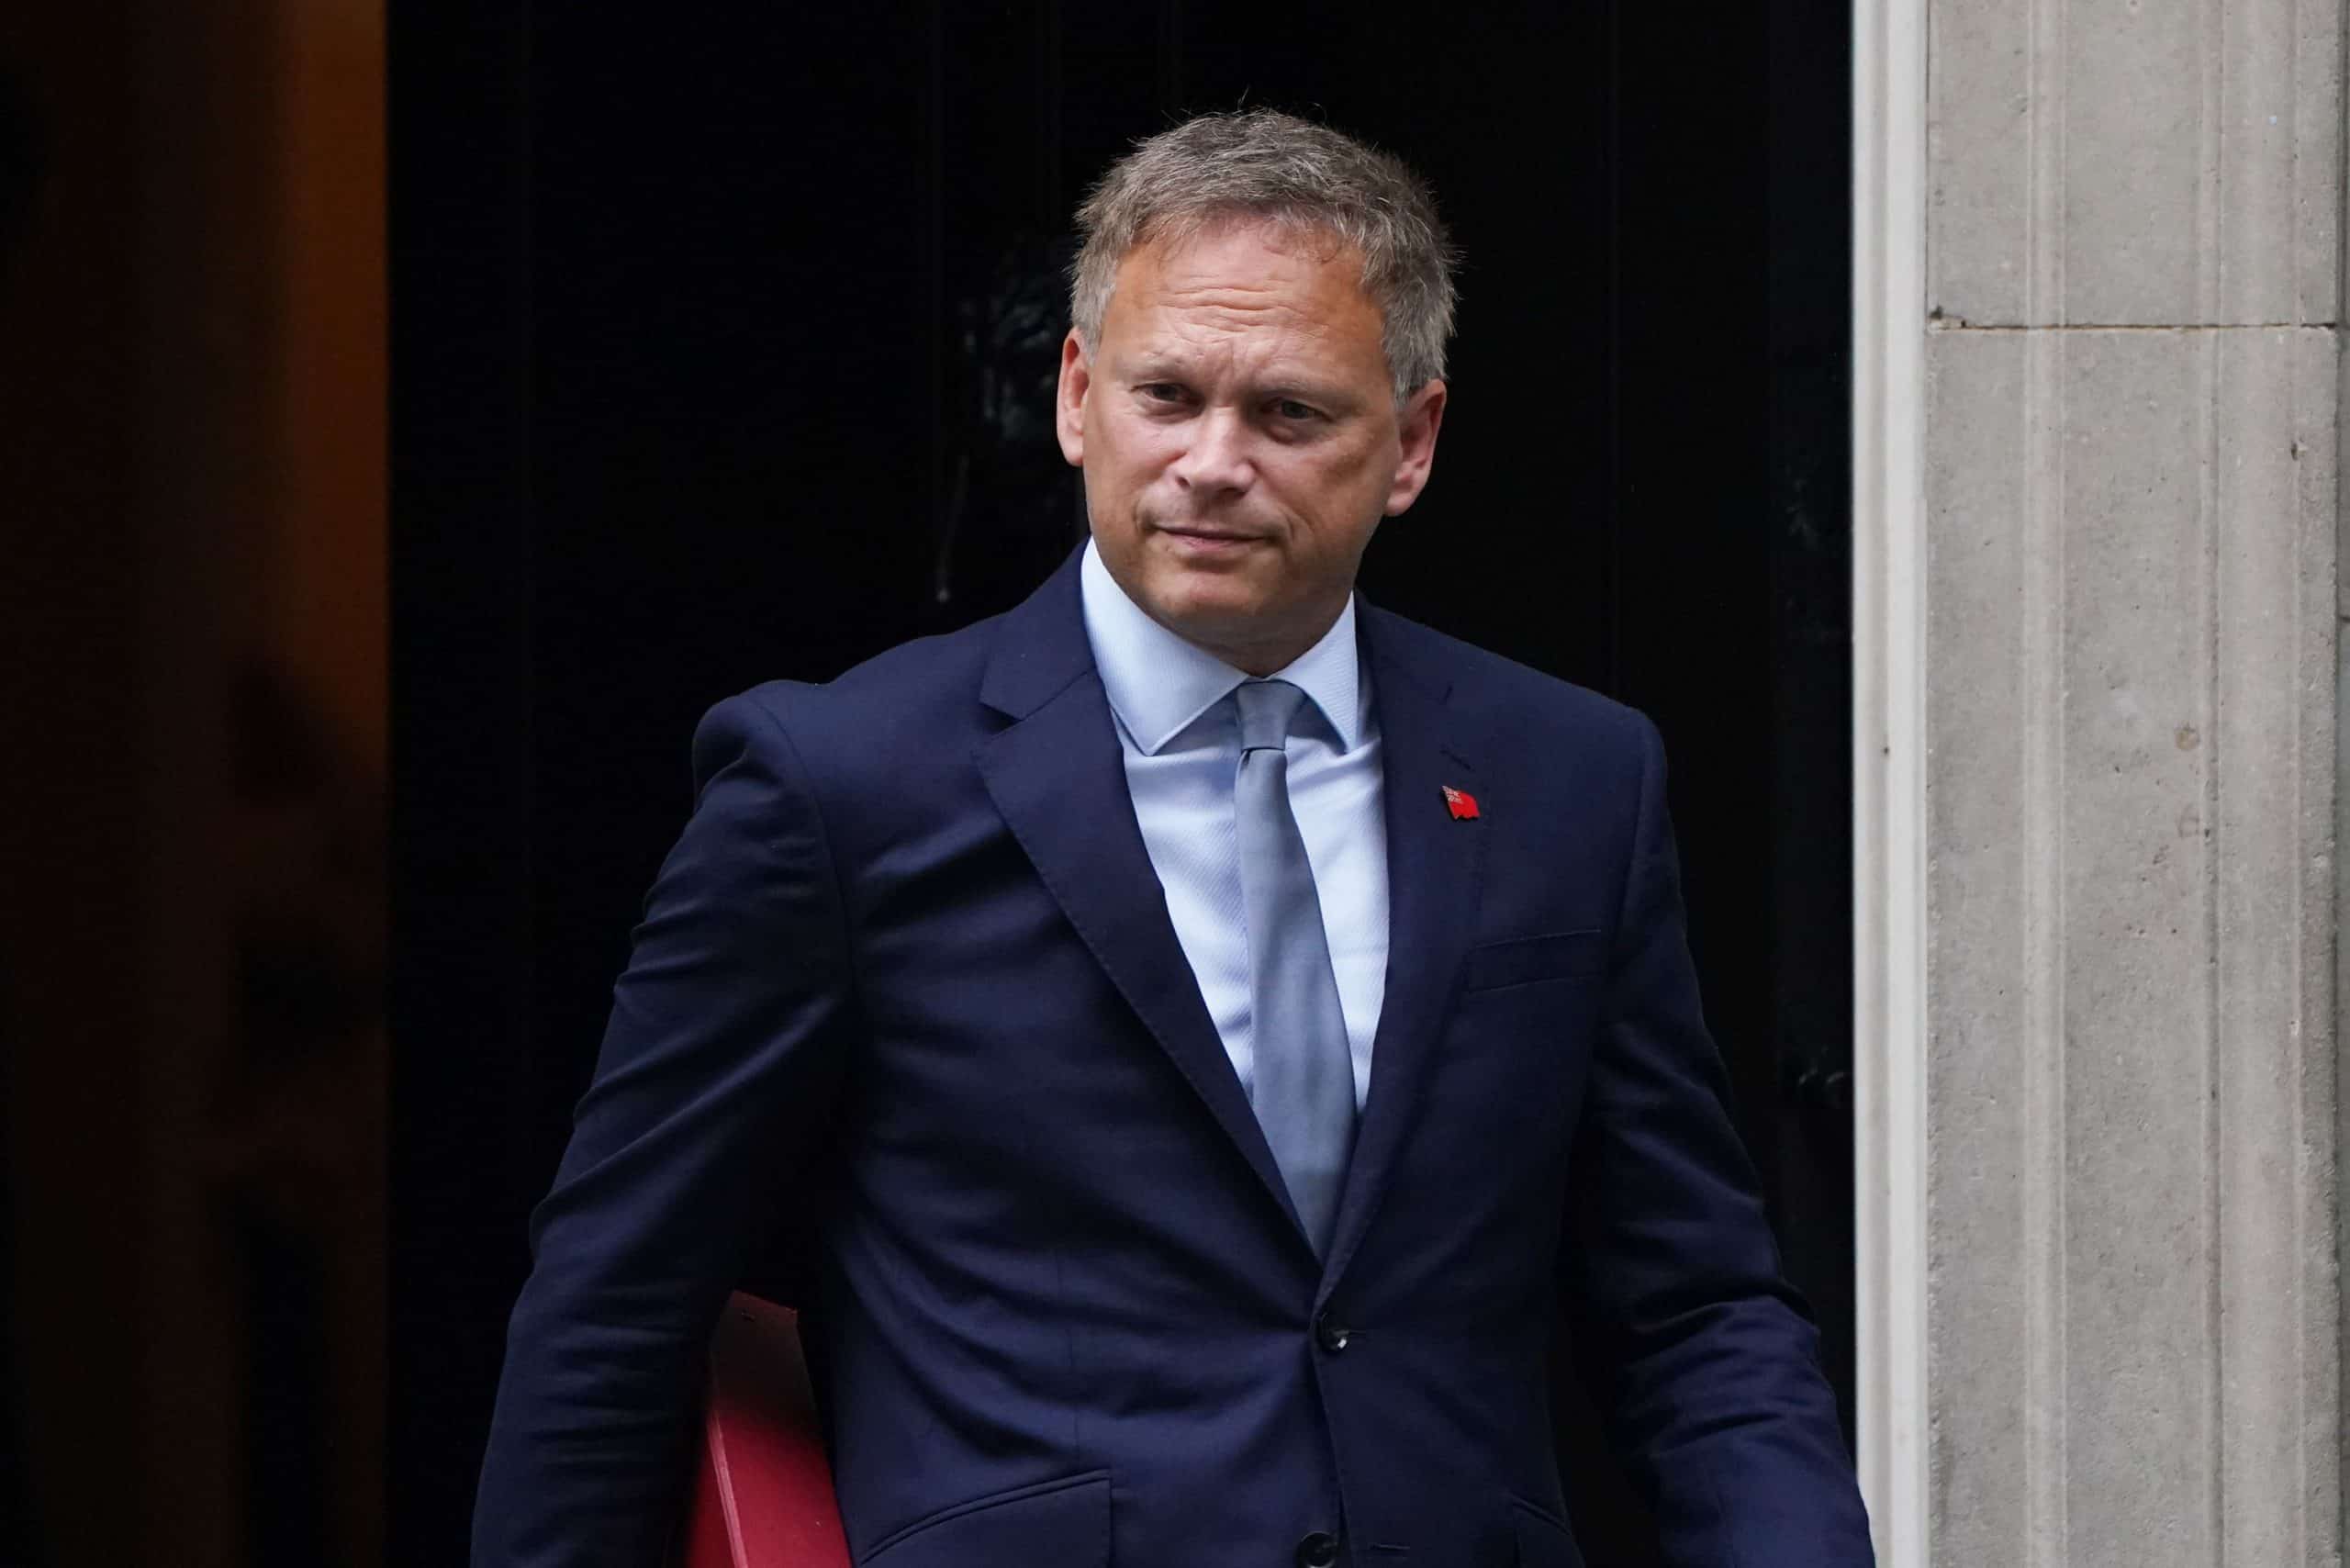 Grant Shapps’ staff held ANOTHER boozy lockdown party last Christmas